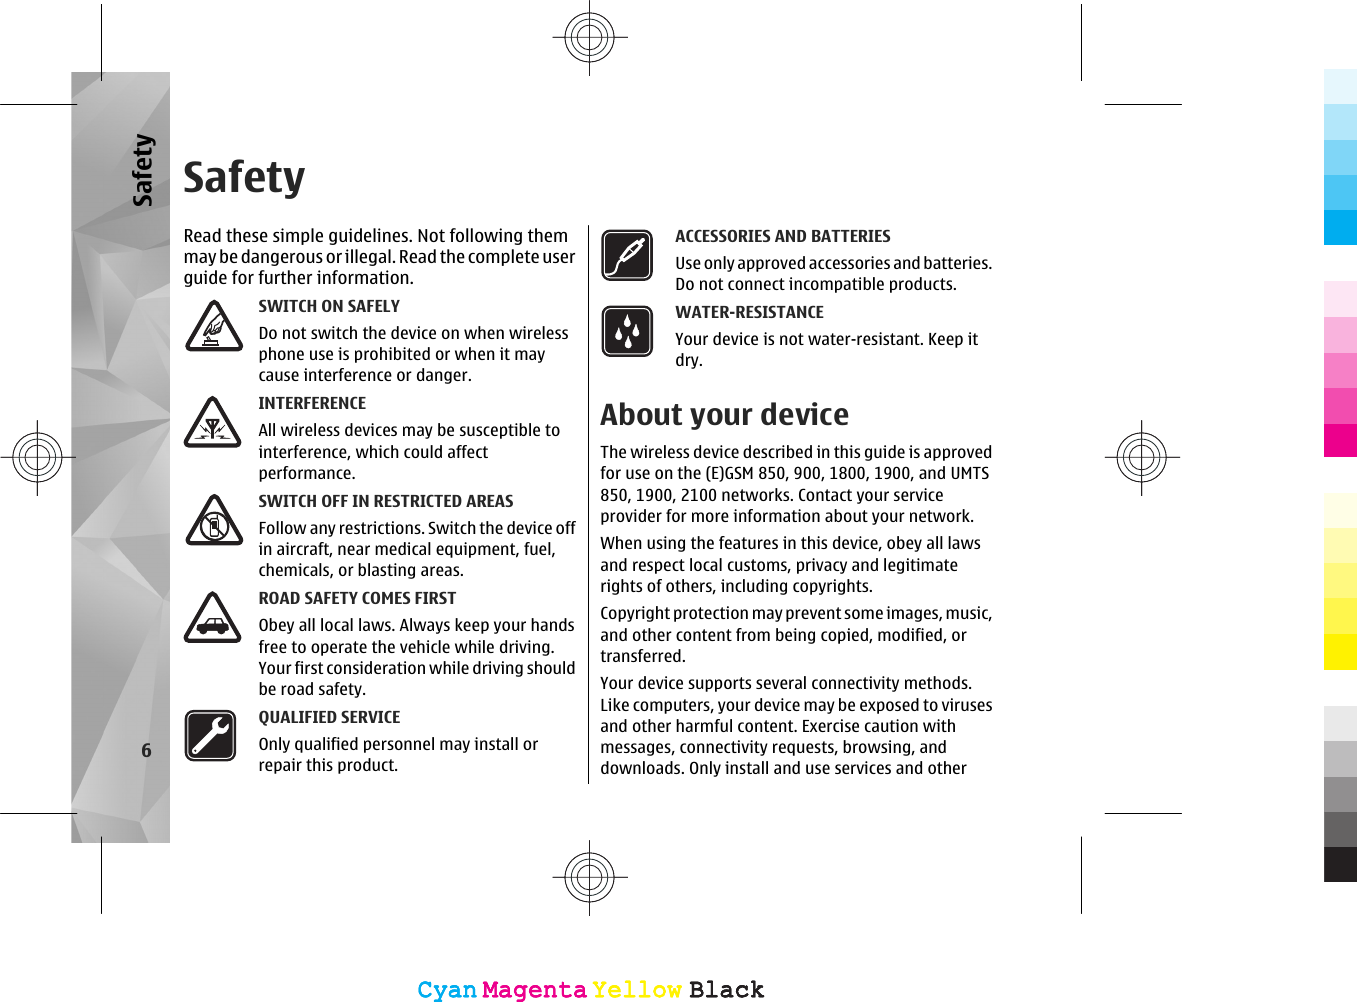 SafetyRead these simple guidelines. Not following themmay be dangerous or illegal. Read  the co mplete us erguide for further information.SWITCH ON SAFELYDo not switch the device on when wirelessphone use is prohibited or when it maycause interference or danger.INTERFERENCEAll wireless devices may be susceptible tointerference, which could affectperformance.SWITCH OFF IN RESTRICTED AREASFollow any restrictions. Switch the device offin aircraft, near medical equipment, fuel,chemicals, or blasting areas.ROAD SAFETY COMES FIRSTObey all local laws. Always keep your handsfree to operate the vehicle while driving.Your first consideration while driving shouldbe road safety.QUALIFIED SERVICEOnly qualified personnel may install orrepair this product.ACCESSORIES AND BATTERIESUse only approved accessories and batteries.Do not connect incompatible products.WATER-RESISTANCEYour device is not water-resistant. Keep itdry.About your deviceThe wireless device described in this guide is approvedfor use on the (E)GSM 850, 900, 1800, 1900, and UMTS850, 1900, 2100 networks. Contact your serviceprovider for more information about your network.When using the features in this device, obey all lawsand respect local customs, privacy and legitimaterights of others, including copyrights.Copyright protection may prevent some images, music,and other content from being copied, modified, ortransferred.Your device supports several connectivity methods.Like computers, your device may be exposed to virusesand other harmful content. Exercise caution withmessages, connectivity requests, browsing, anddownloads. Only install and use services and other6SafetyCyanCyanMagentaMagentaYellowYellowBlackBlackCyanCyanMagentaMagentaYellowYellowBlackBlack